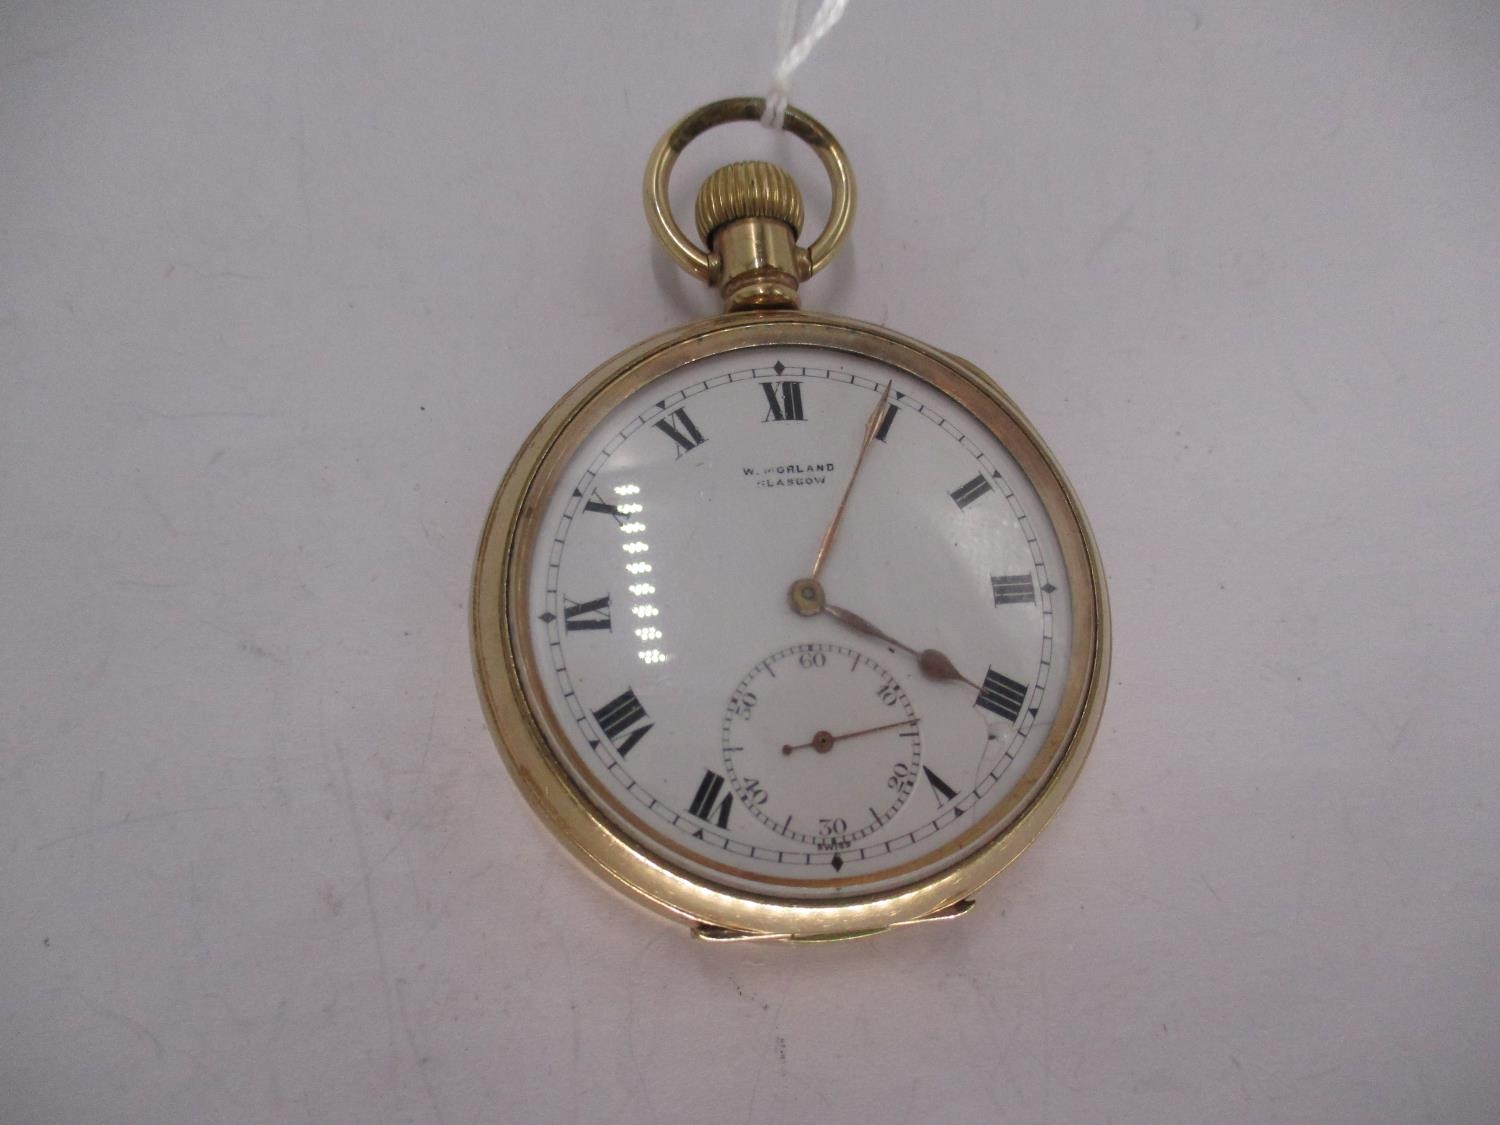 Rolex Rolled Gold Open Faced Pocket Watch, White Enamel Dial with Roman Numerals and Subsidiary